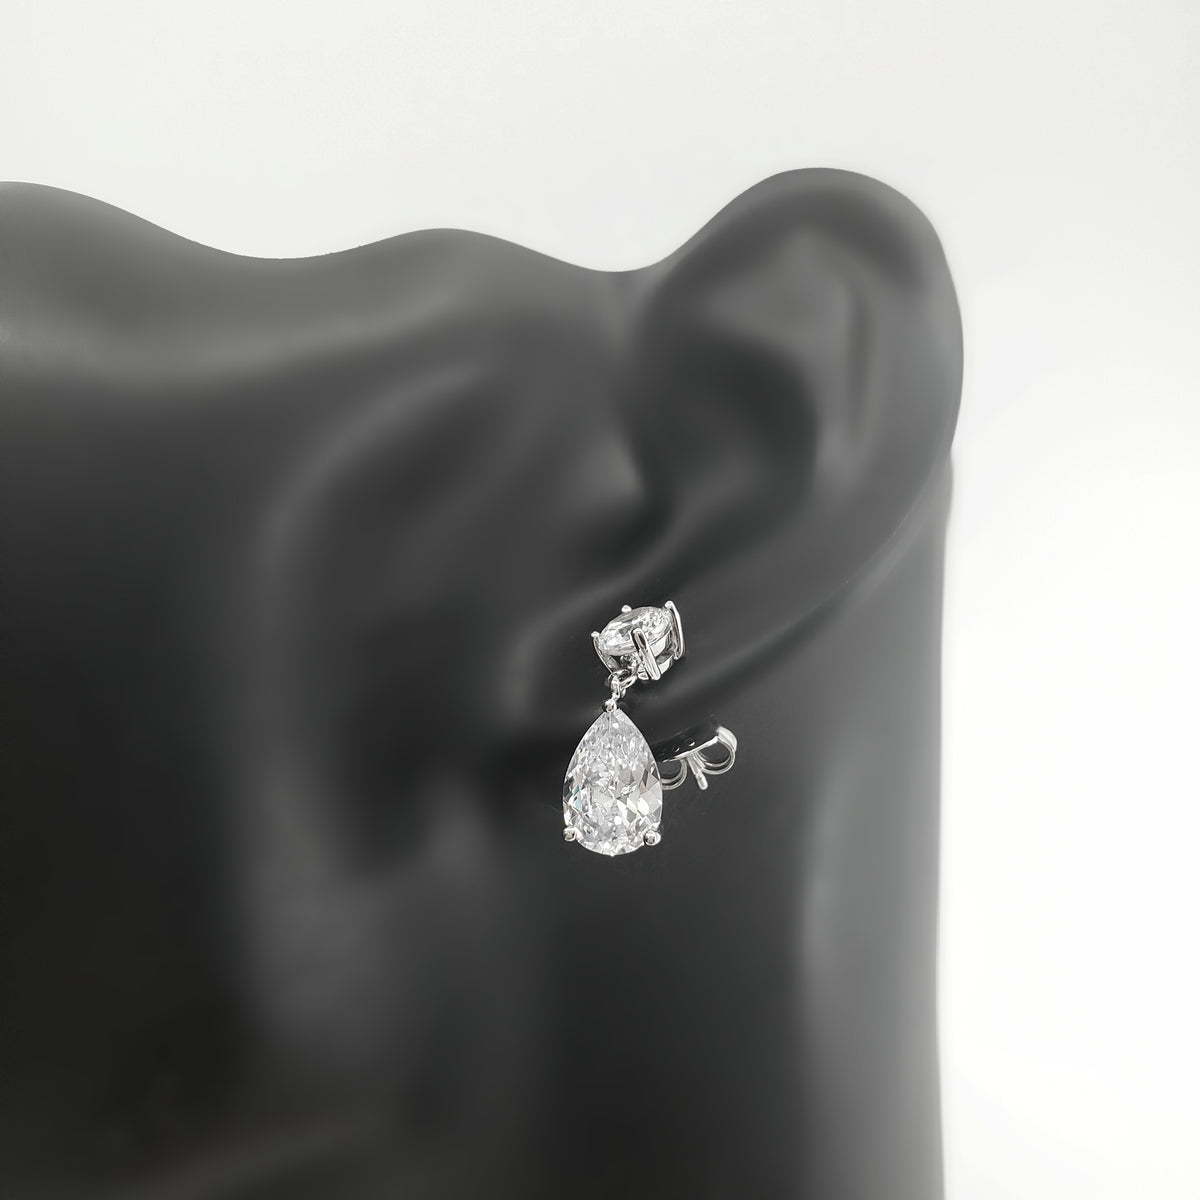 925 Sterling Silver 5.5mm round and 7mm x 10.5mm Tear Drop Cubic Zirconia Drop Earrings - 17.5mm x 7mm